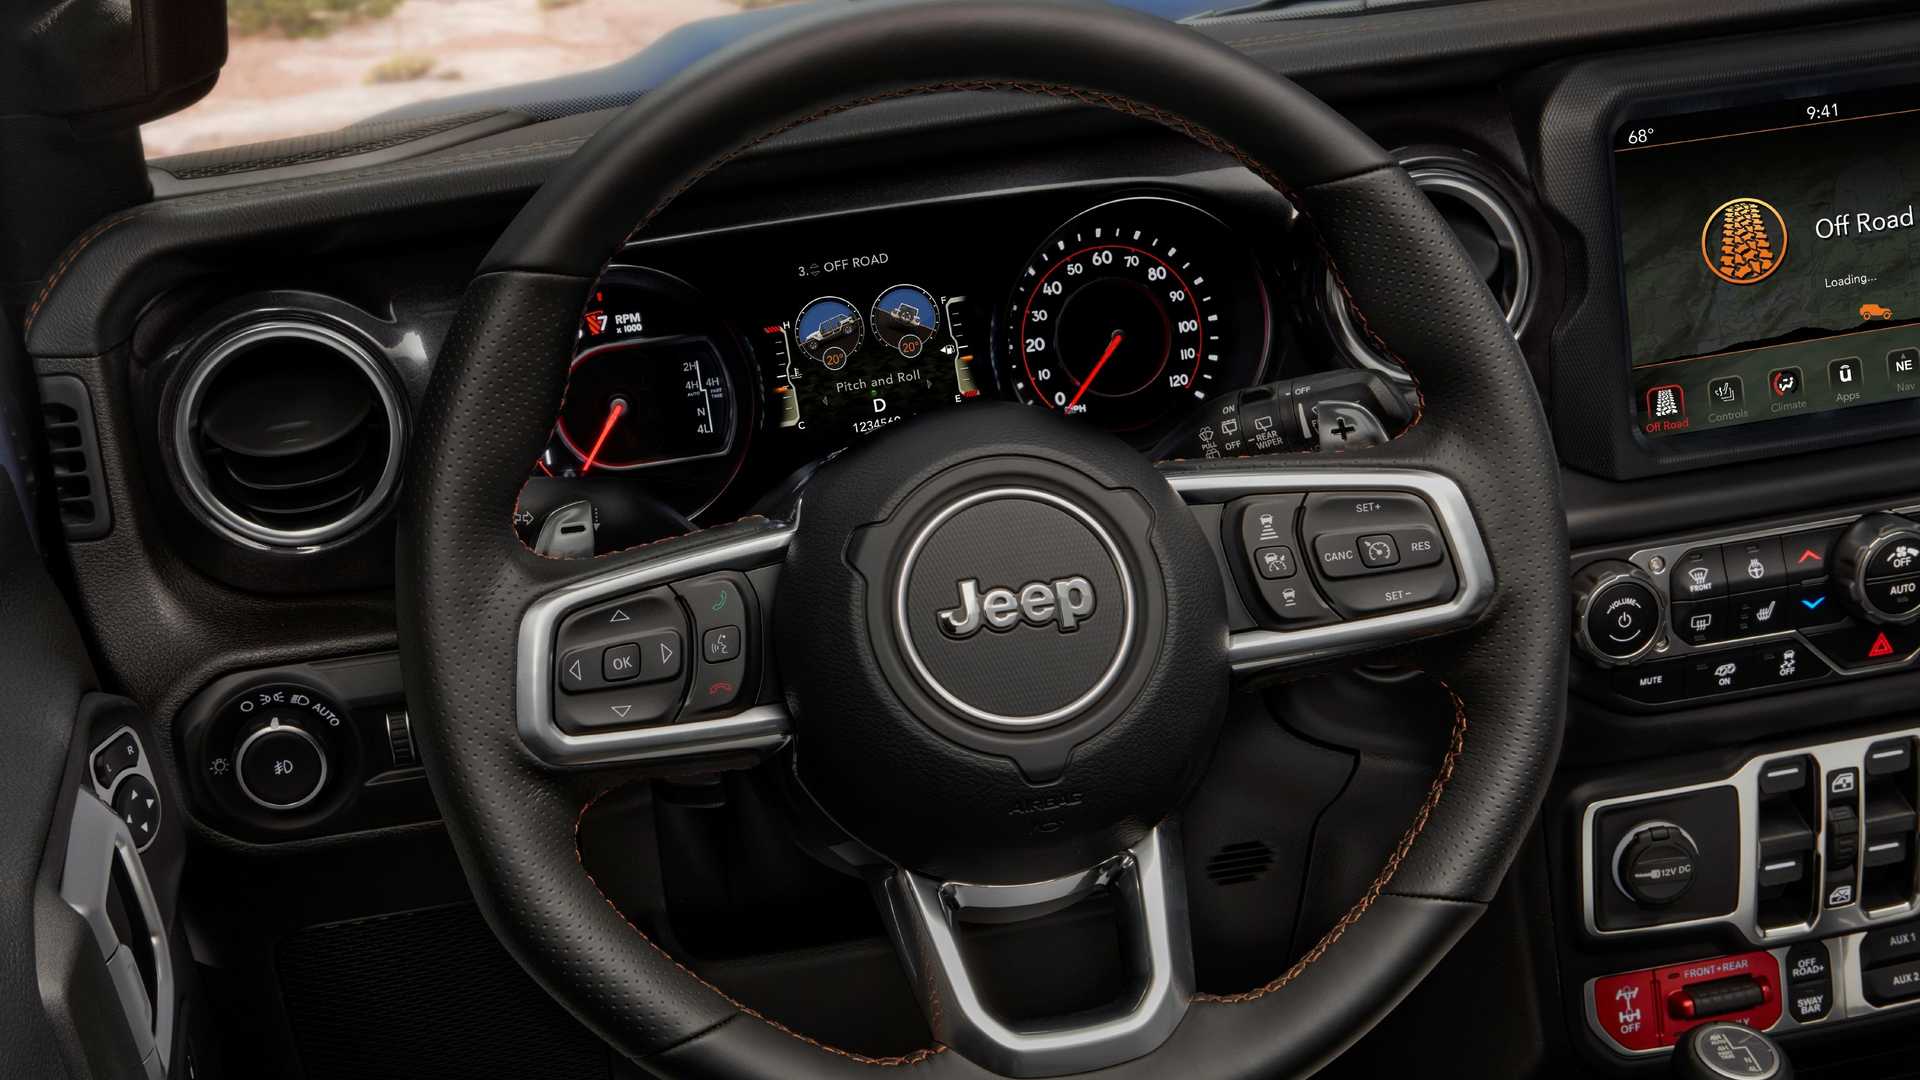 2021 Jeep Wrangler Rubicon 392 HEMI V8 Price Revealed, Costs More Than